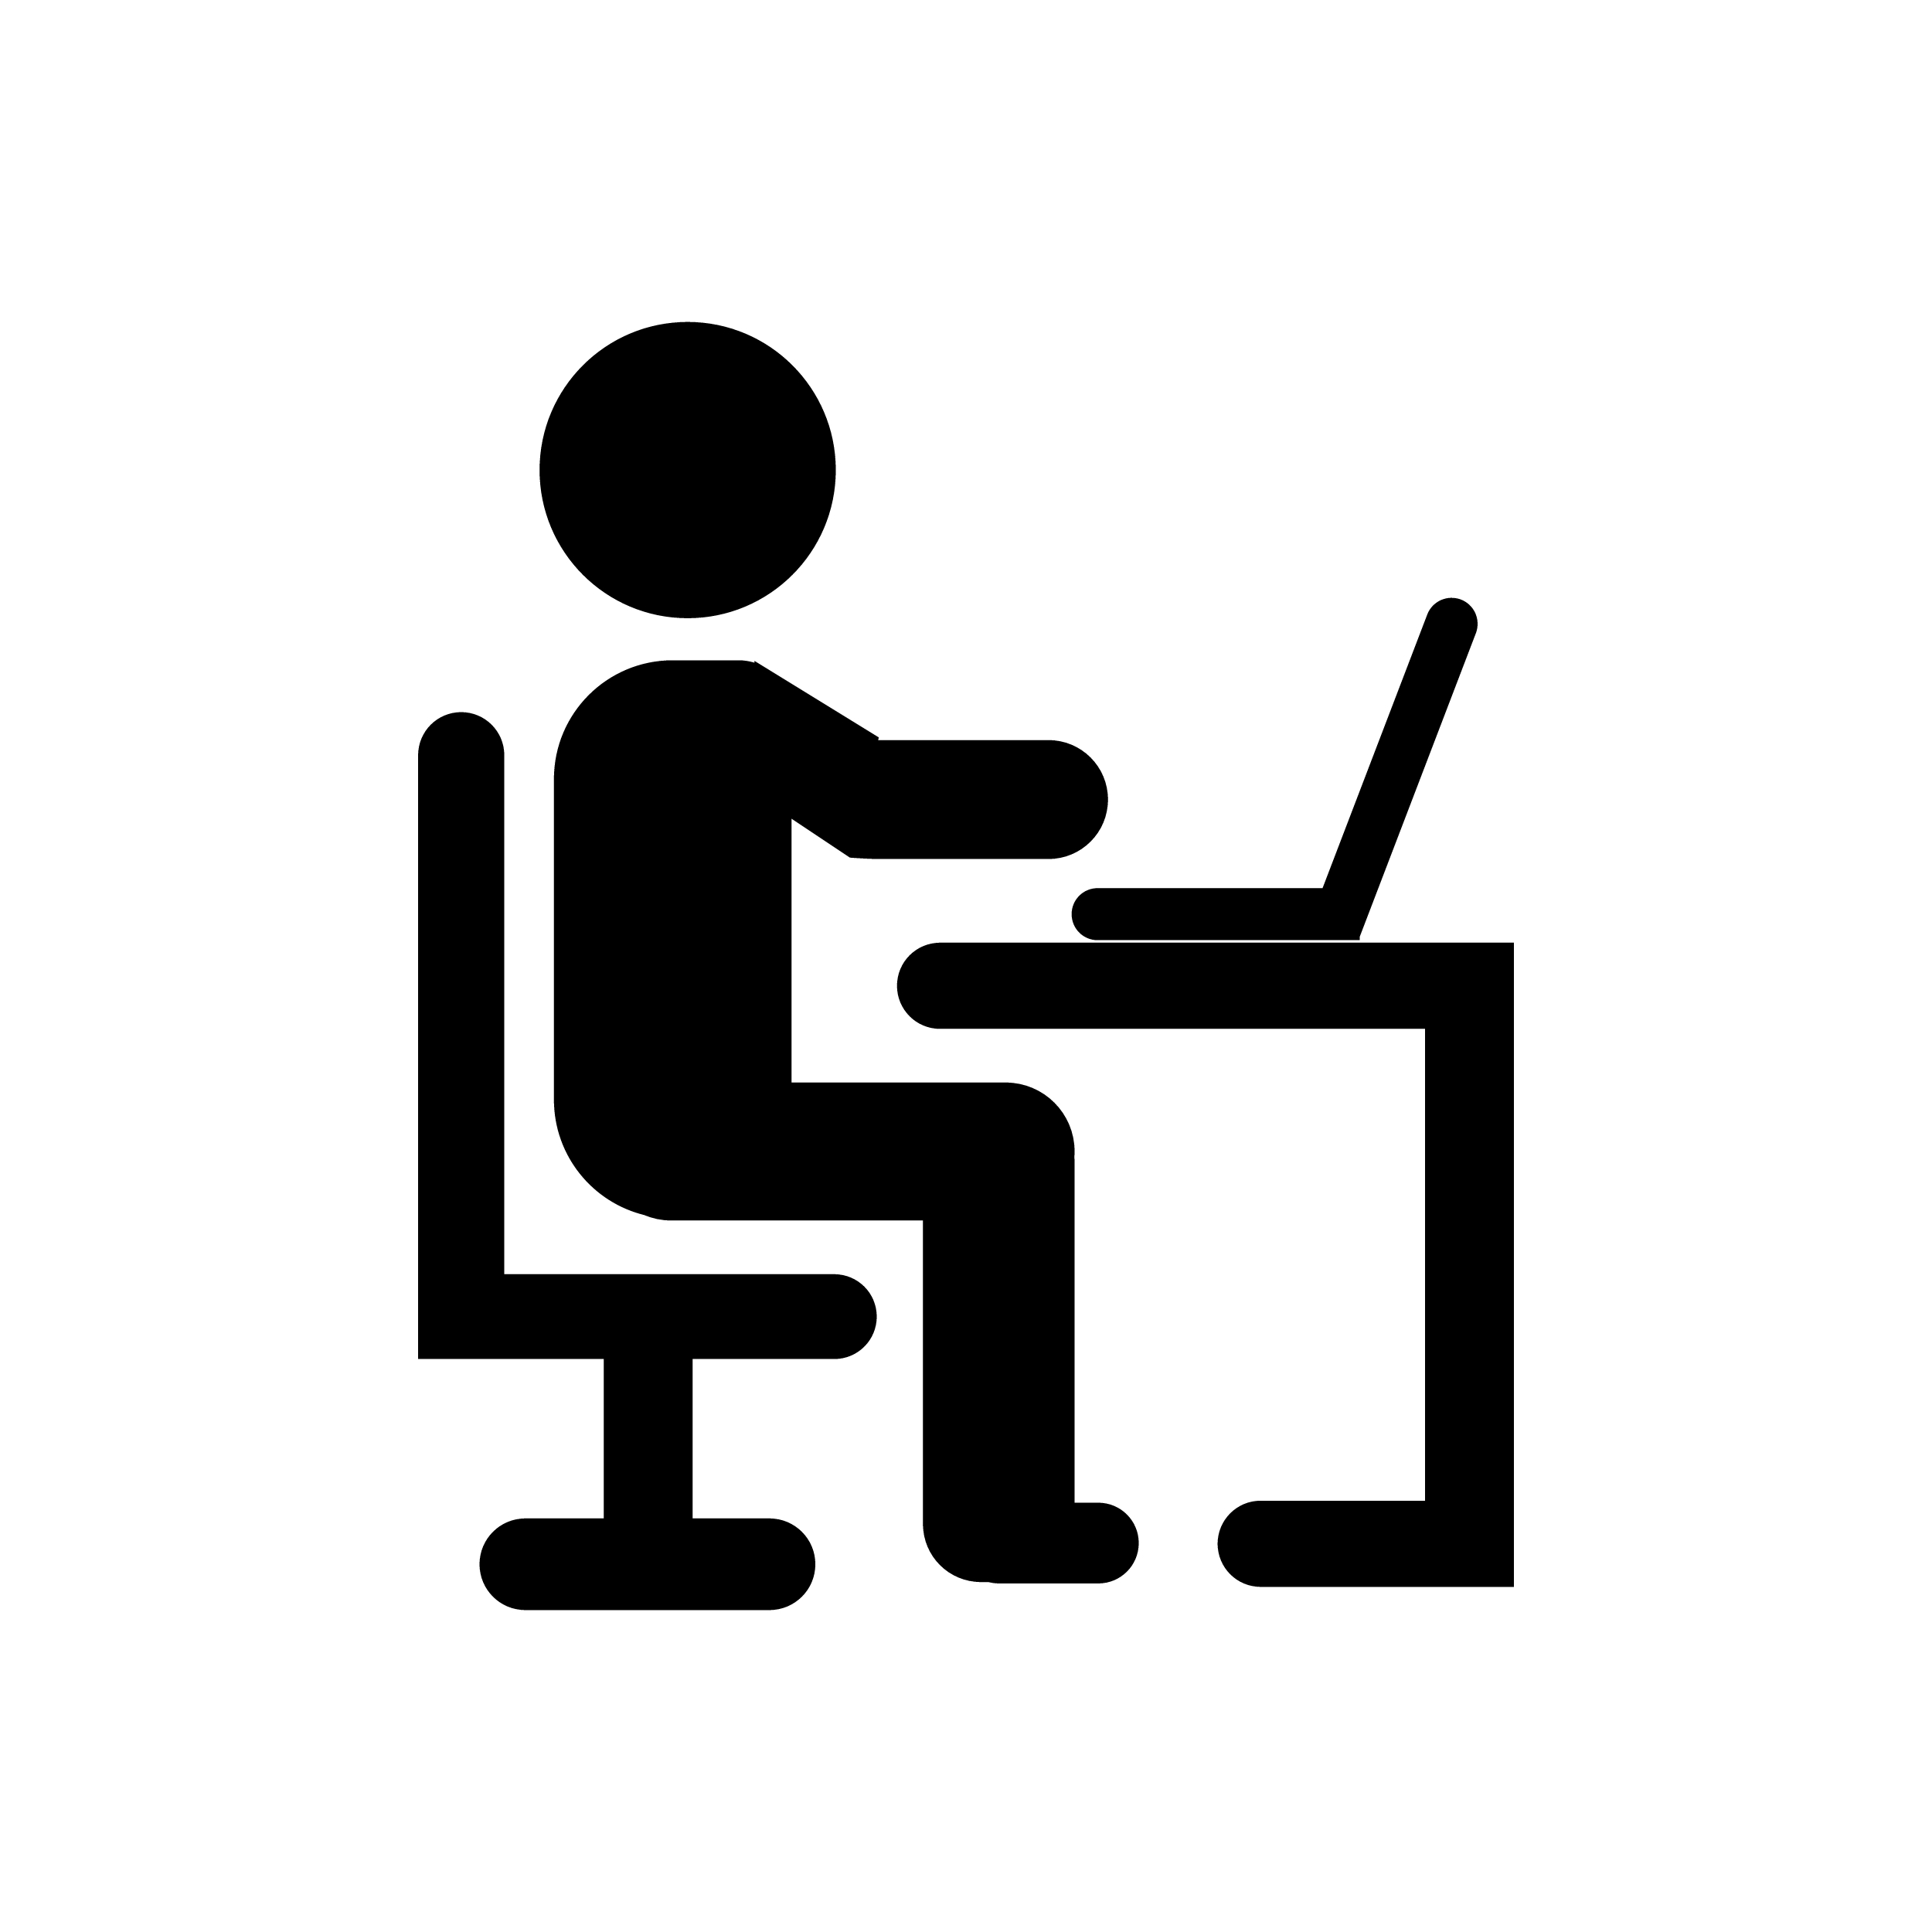 A black-filled silhouette of a person sitting at a computer